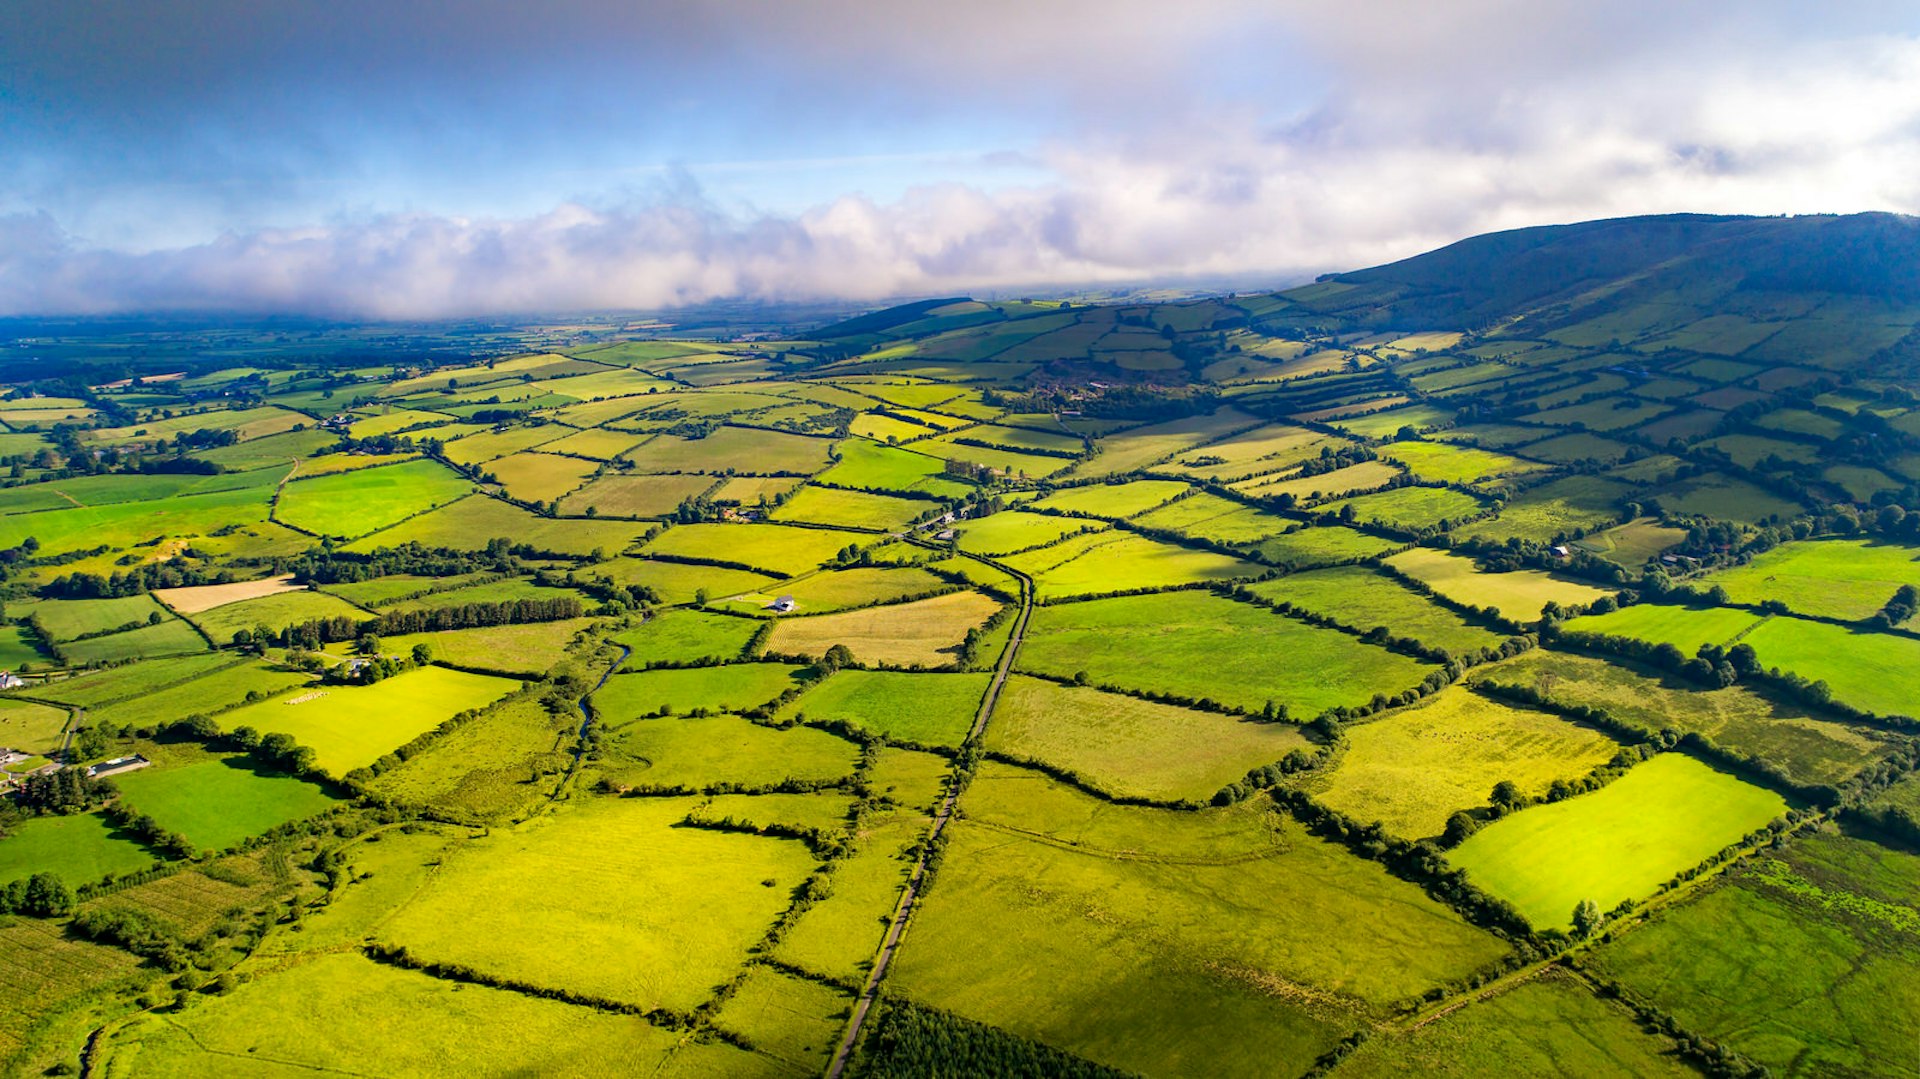 An aerial shot of the green fields of Tipperary, Ireland. The fields are all slightly different shades of green, resembling a patchwork quilt